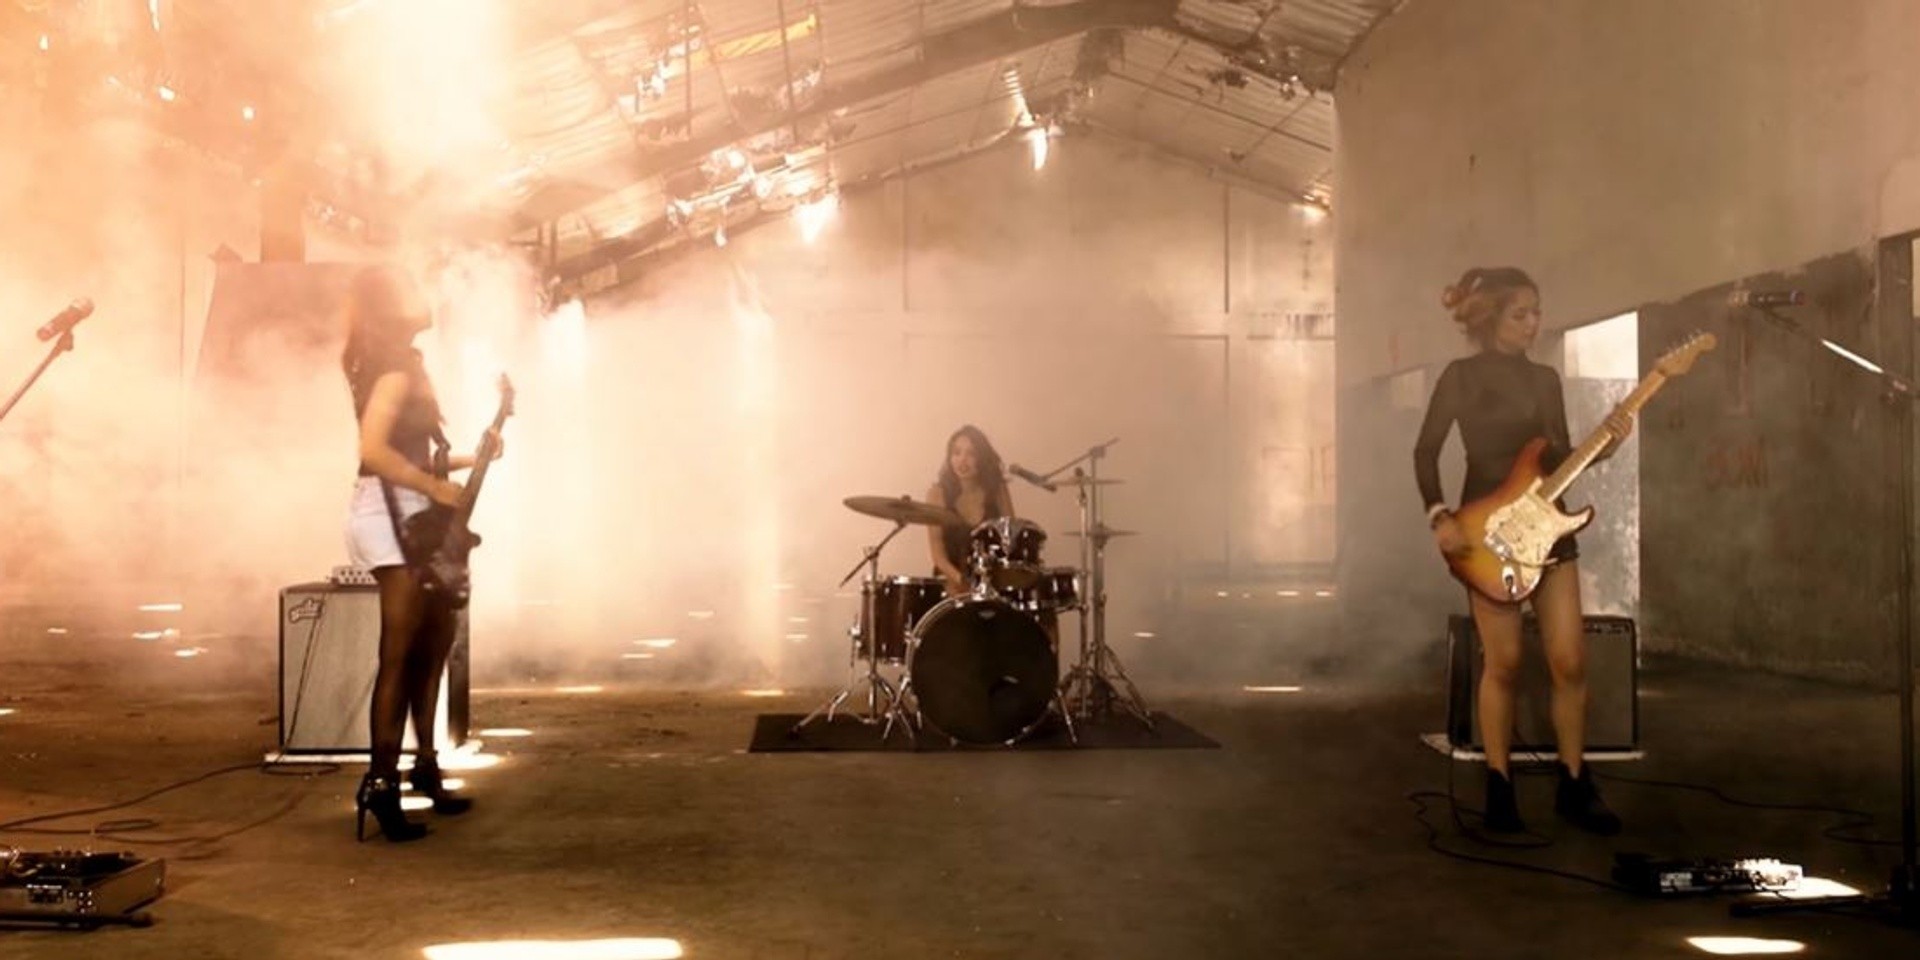 Catfight find sanctuary in new 'Sunlight' music video – watch